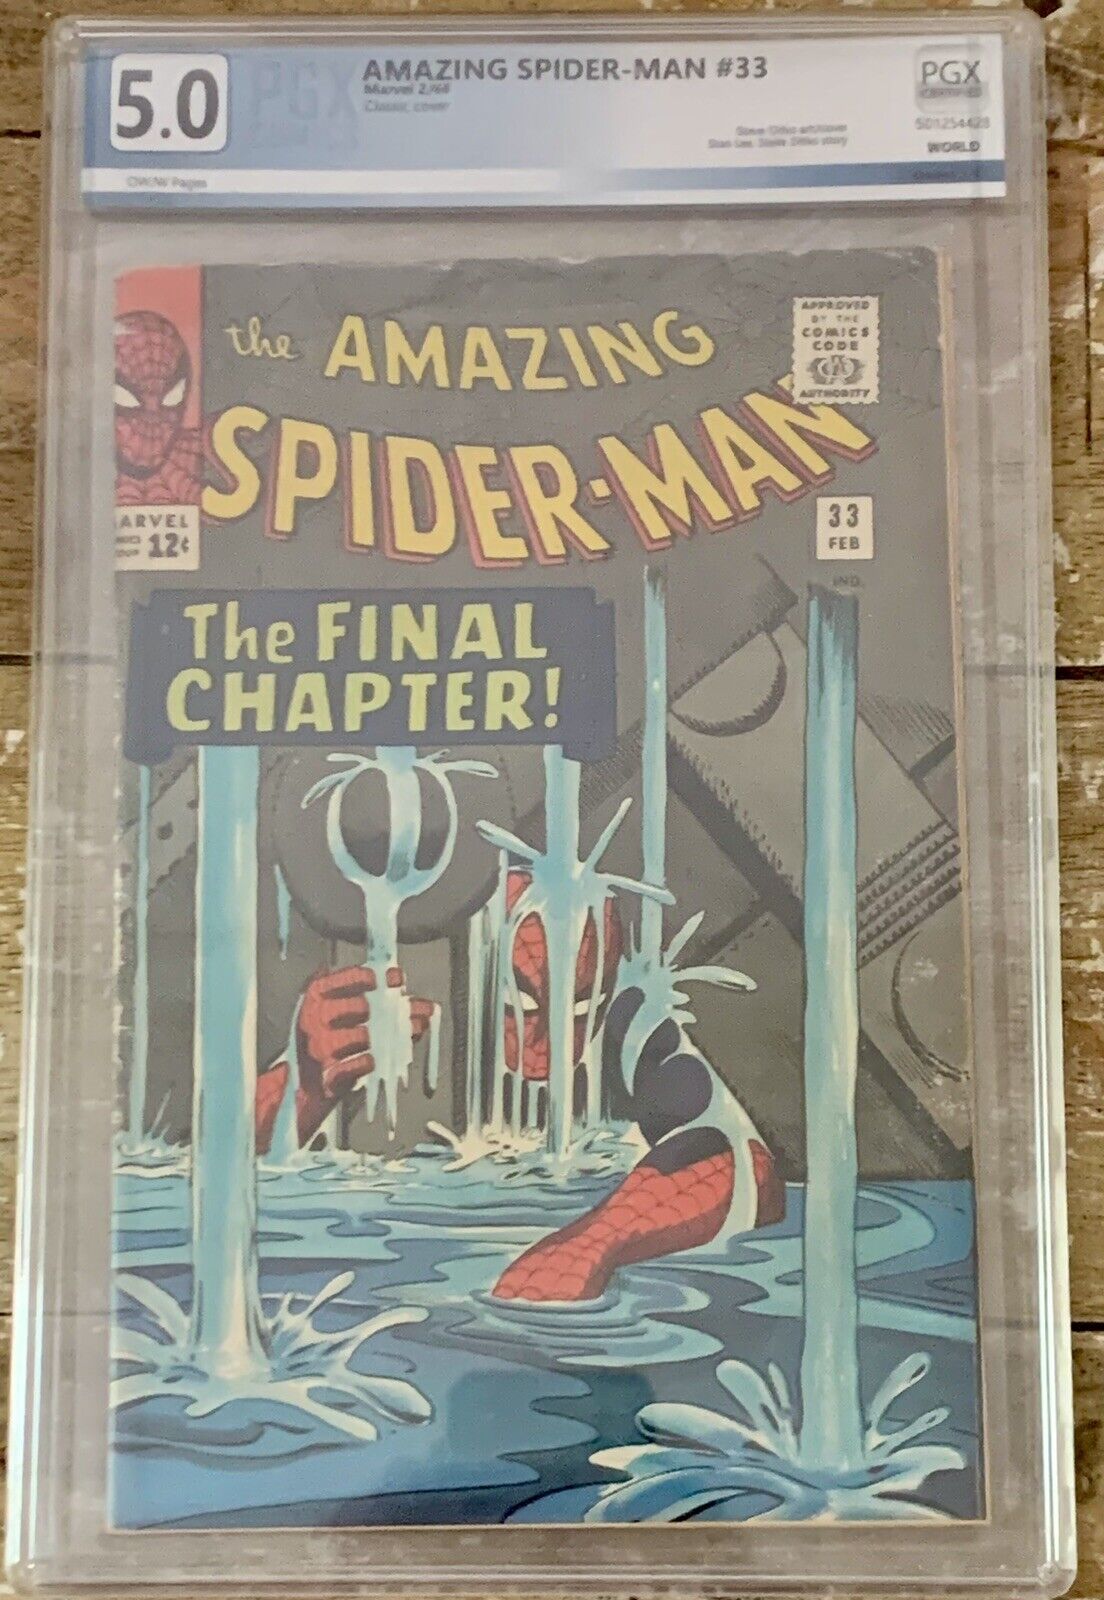 Amazing Spider-Man #33 Graded PGX 5.0 The Final Chapter Ditko Cover 1966 Marvel